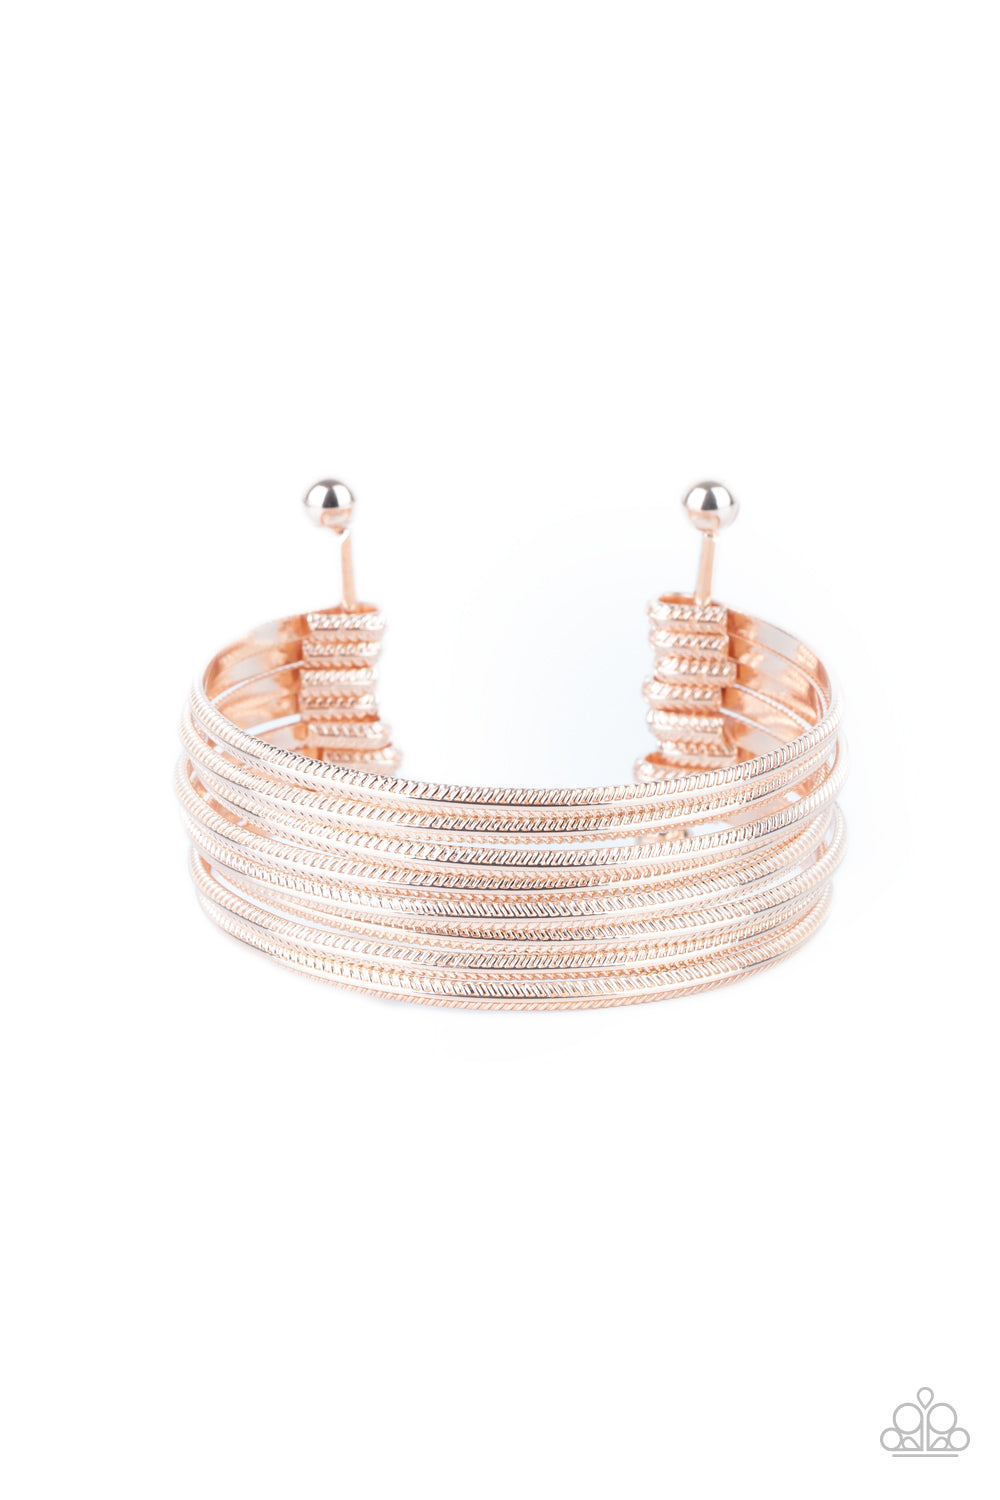 Now Watch Me Stack - Rose Gold Bracelet - Paparazzi Accessories